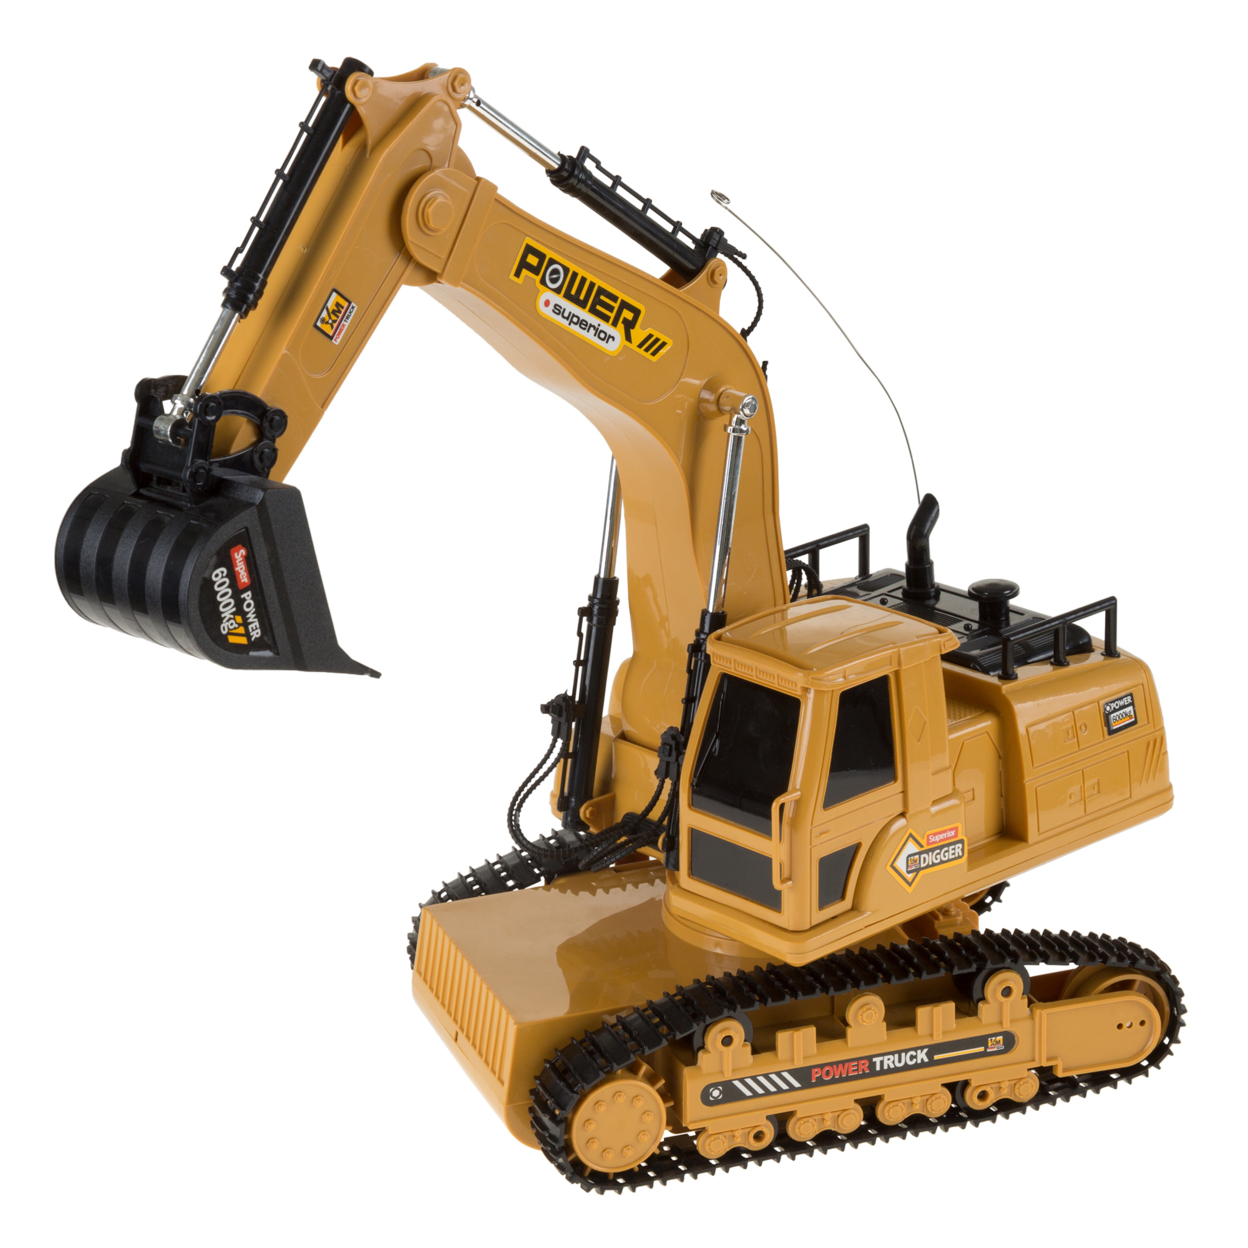 Remote Control Excavator Construction Toy With Movable Claw, 680 Degree Movement And Rechargeable Control With Sound For Boys And Girls